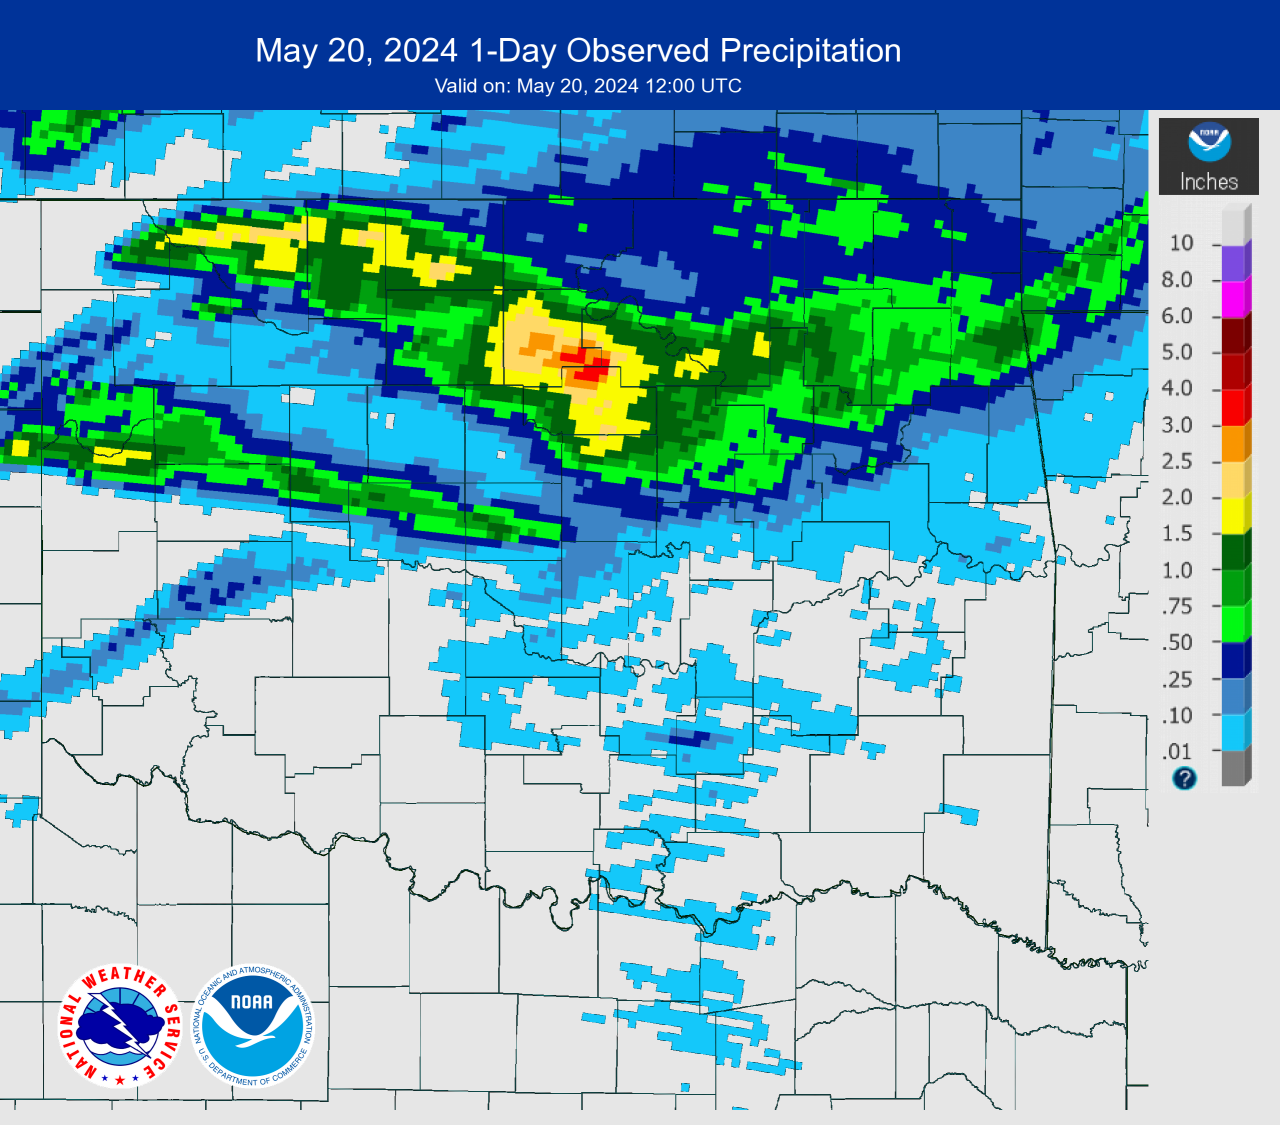 24-hour Observed Rainfall at 7 AM CDT on May 20, 2024